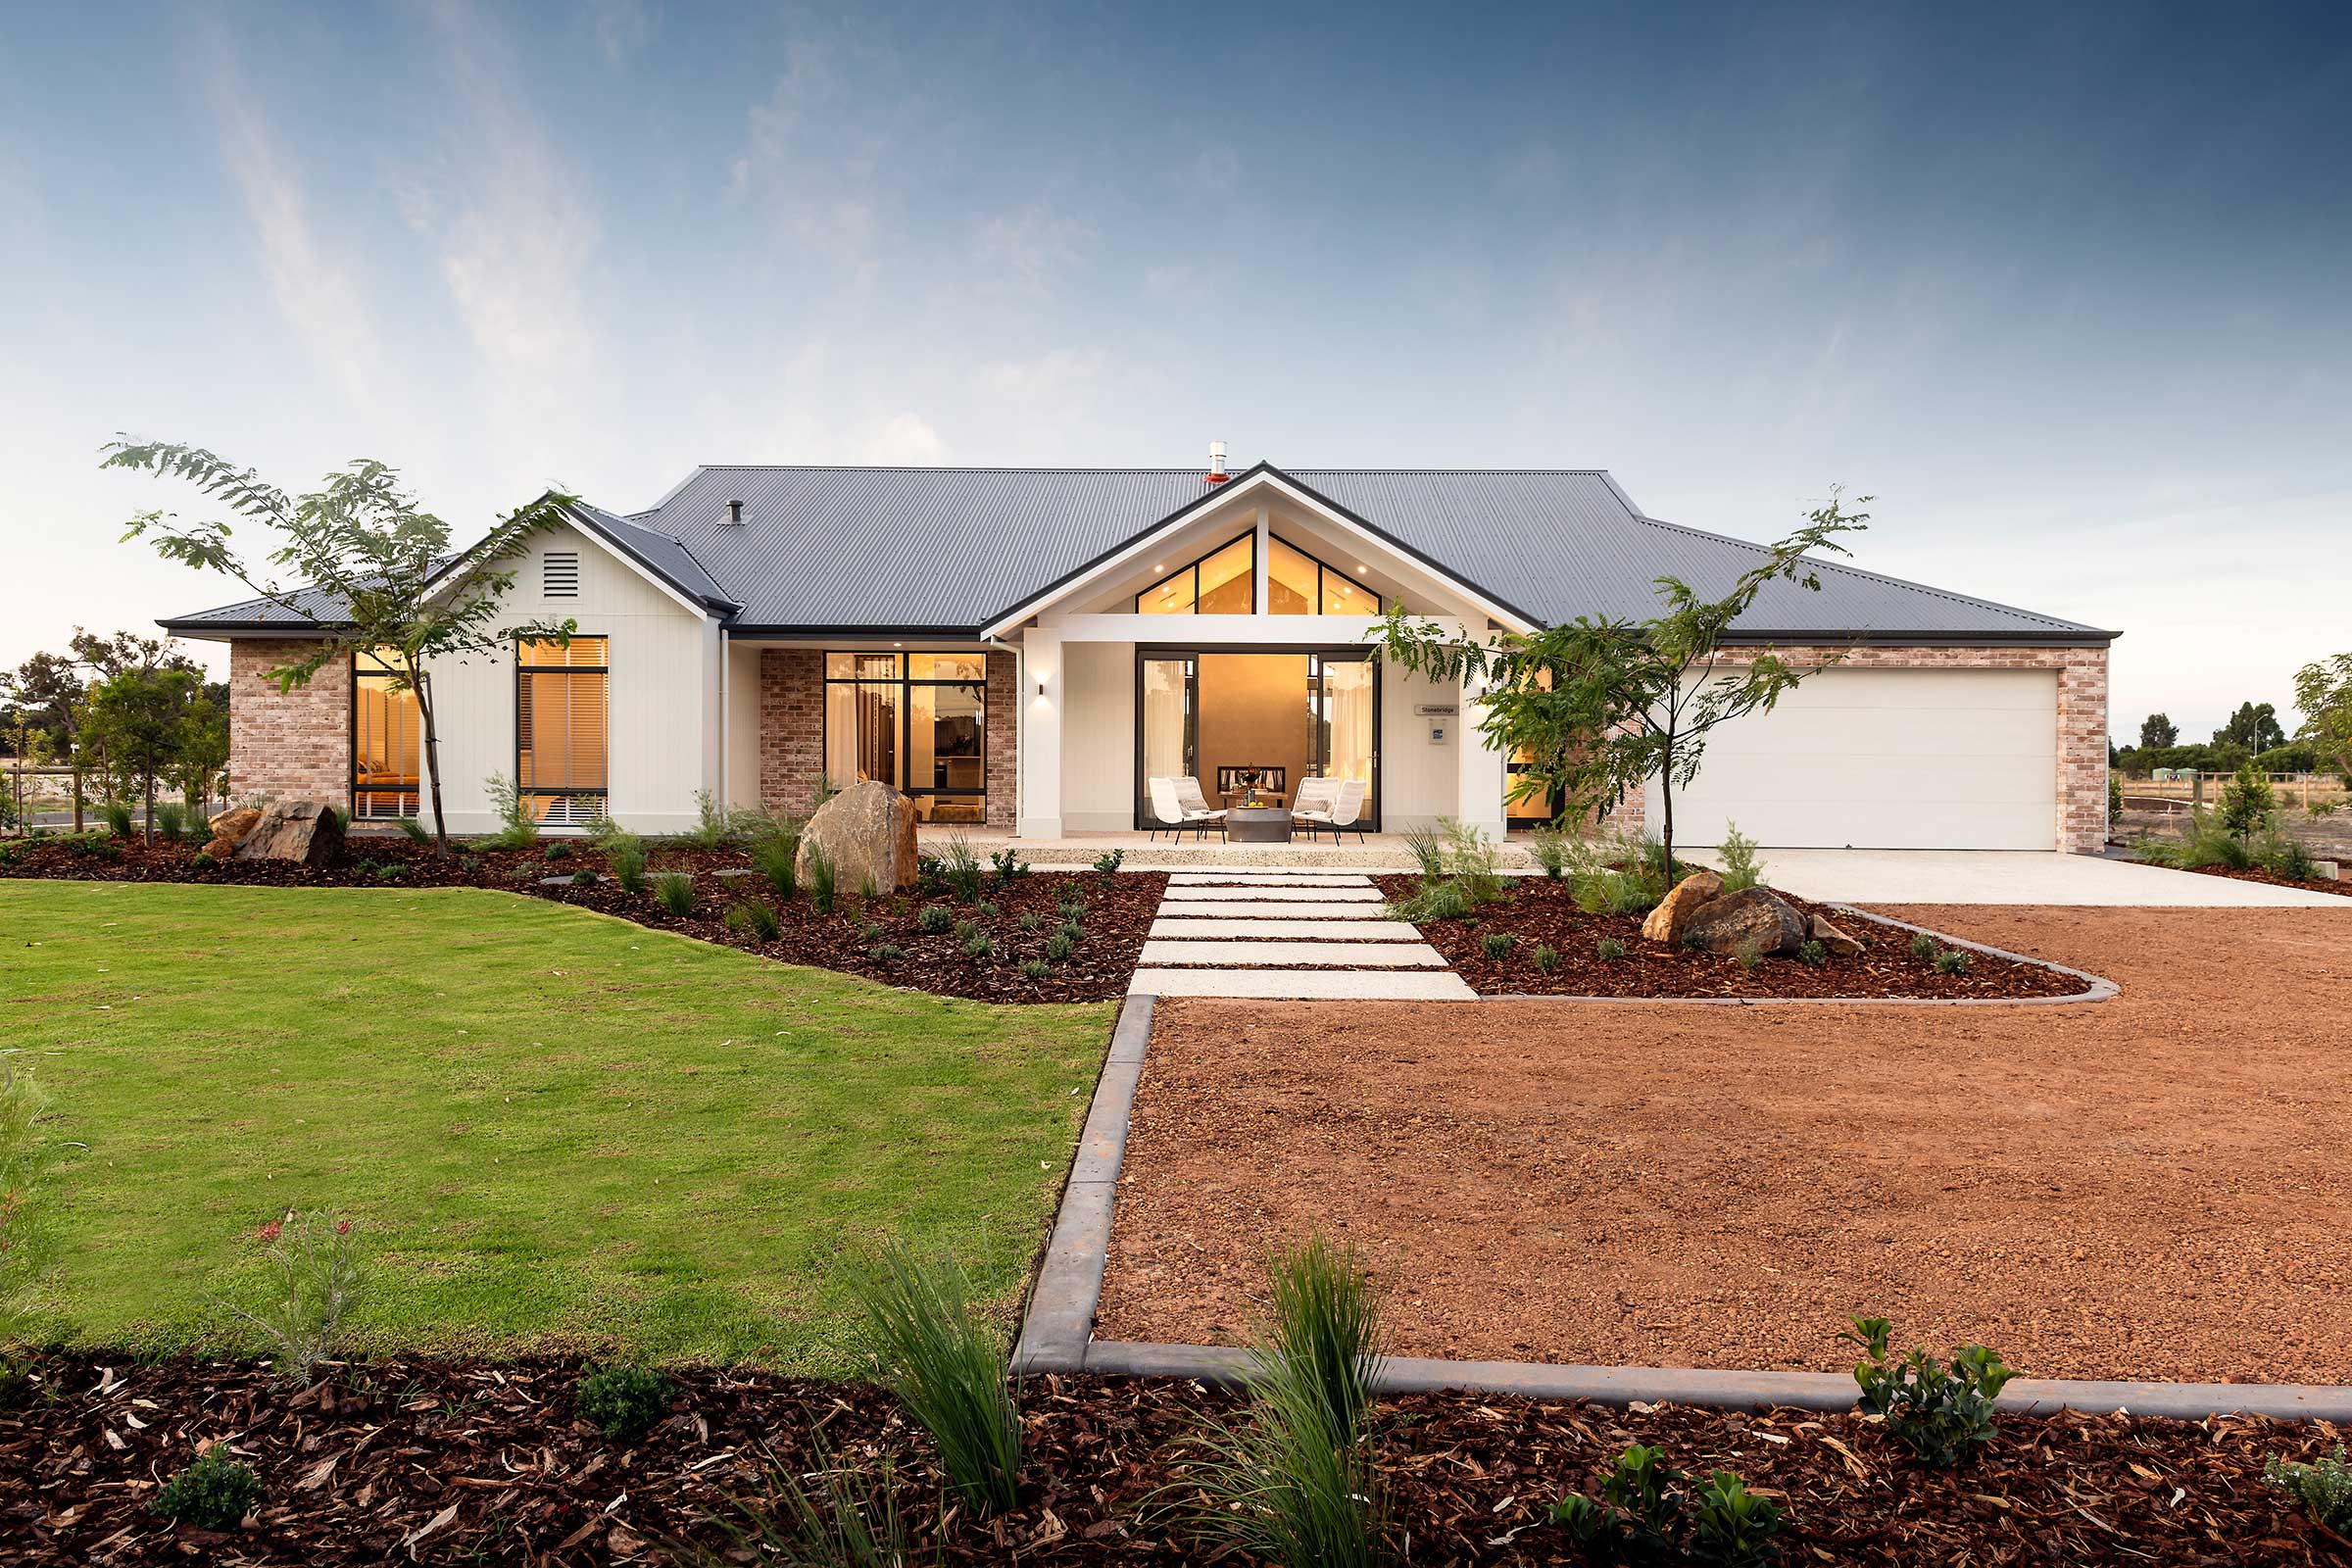 Stonebridge display home is designed for modern country living, Australian farmhouse inspired design by Dale Alcock Homes